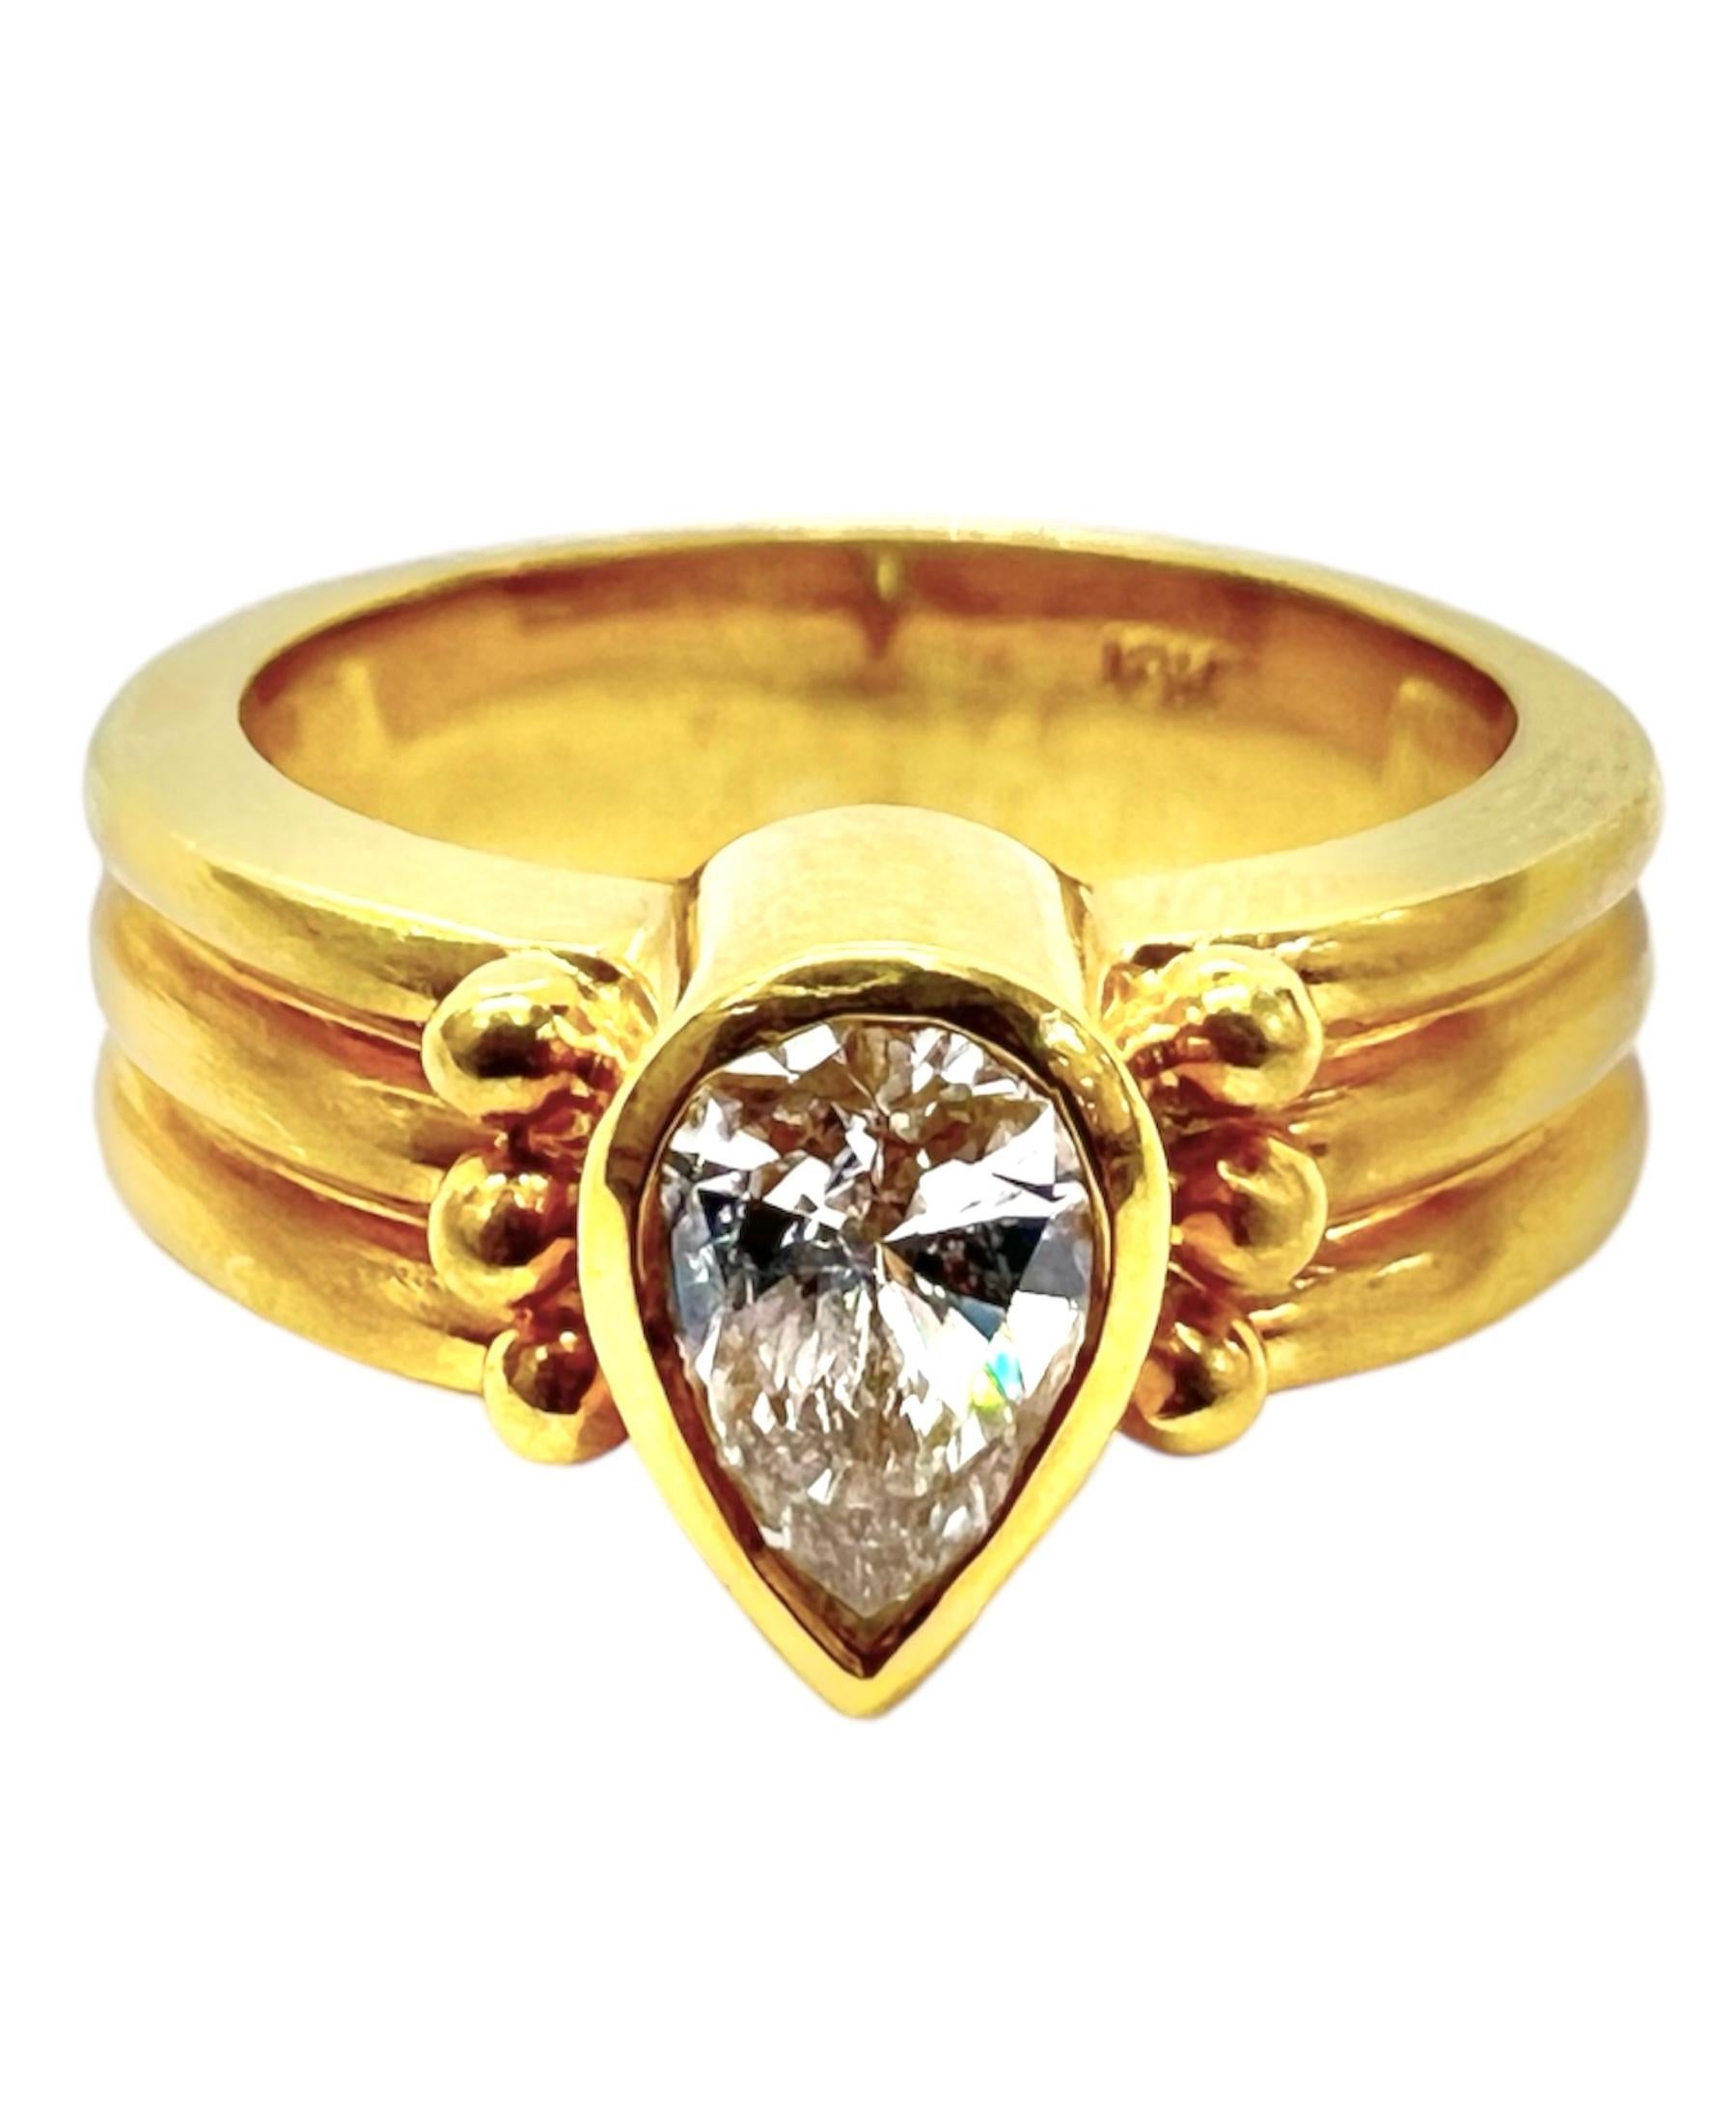 18K yellow gold ring with pear shaped diamond.

Sophia D by Joseph Dardashti LTD has been known worldwide for 35 years and are inspired by classic Art Deco design that merges with modern manufacturing techniques.  